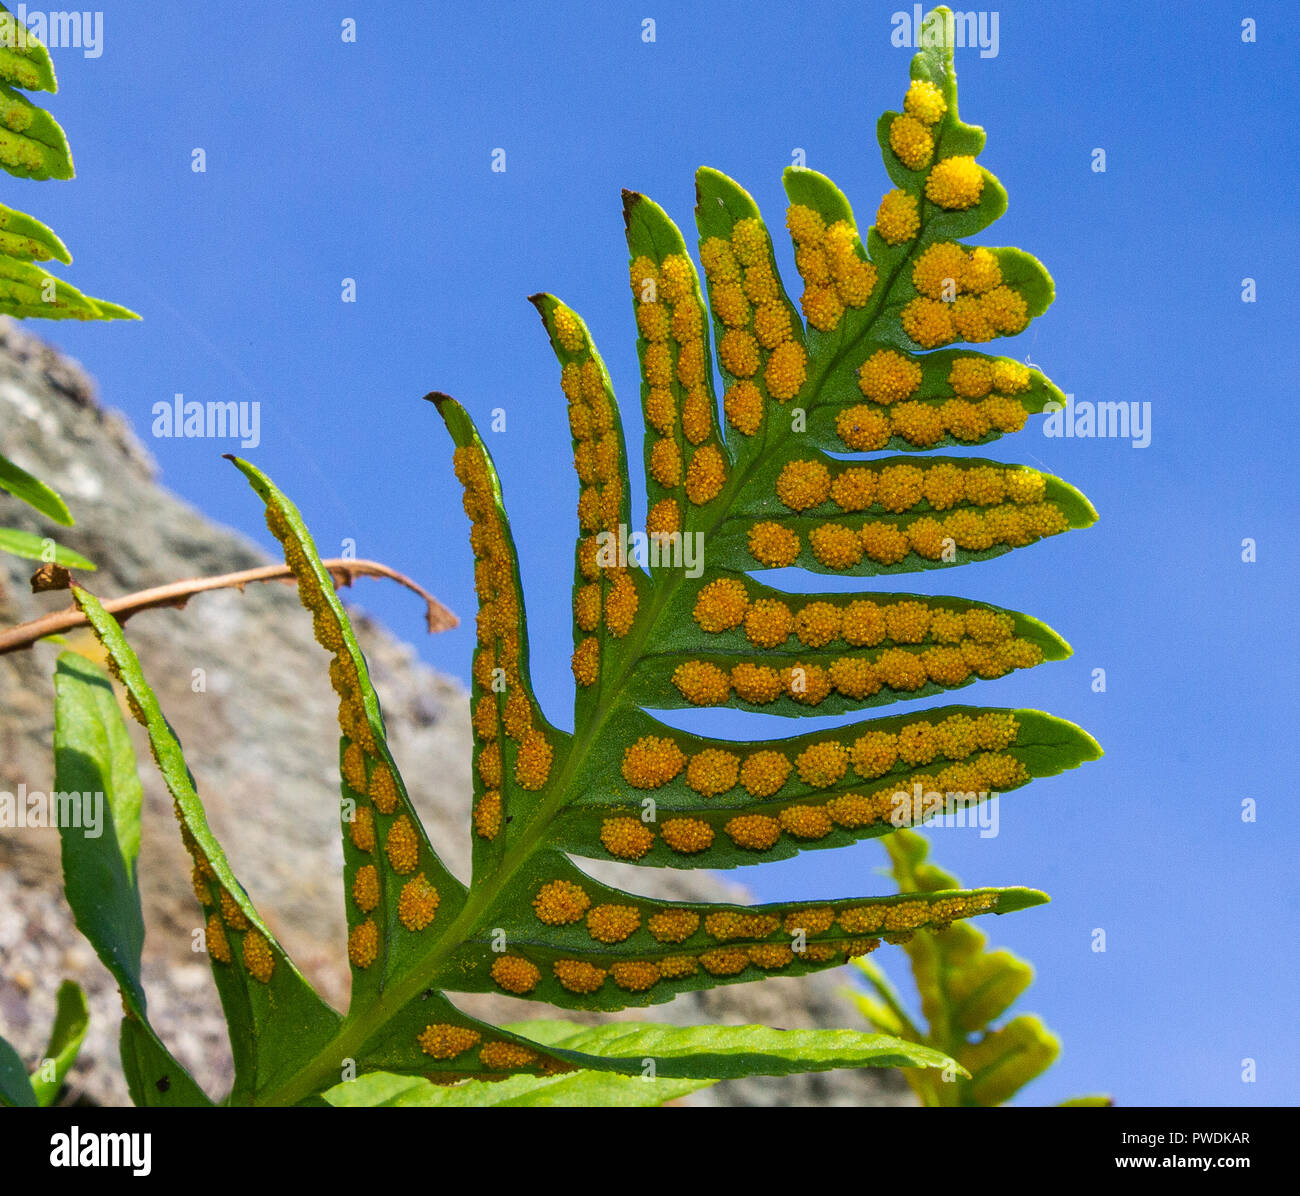 close up of fern spores on the underside of a fern leaf Polypodium cambricum, Welsh polypody Stock Photo